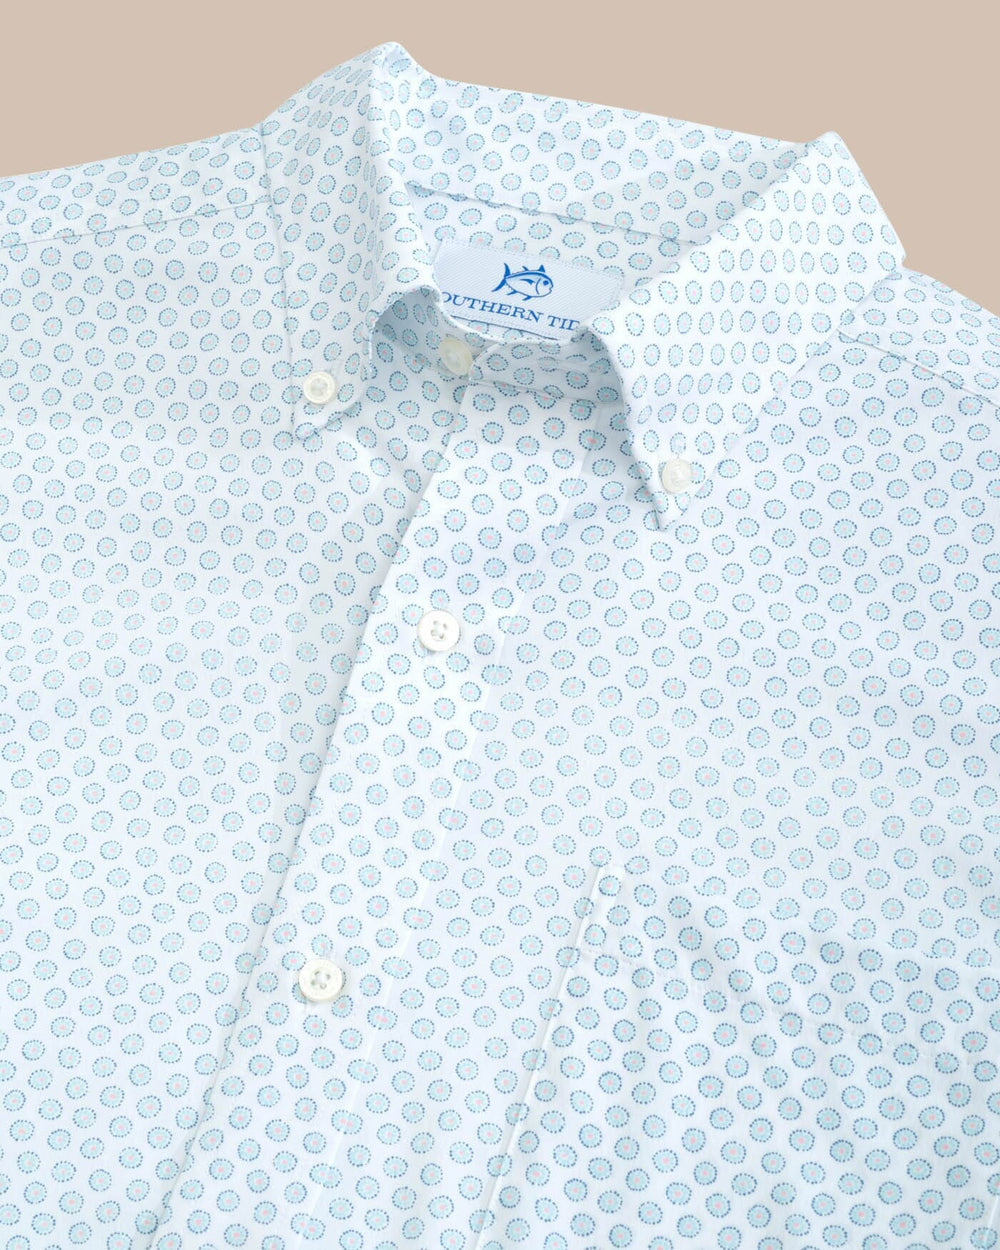 The detail view of the Southern Tide brrr Intercoastal Floral To See Short Sleeve Sportshirt by Southern Tide - Wake Blue